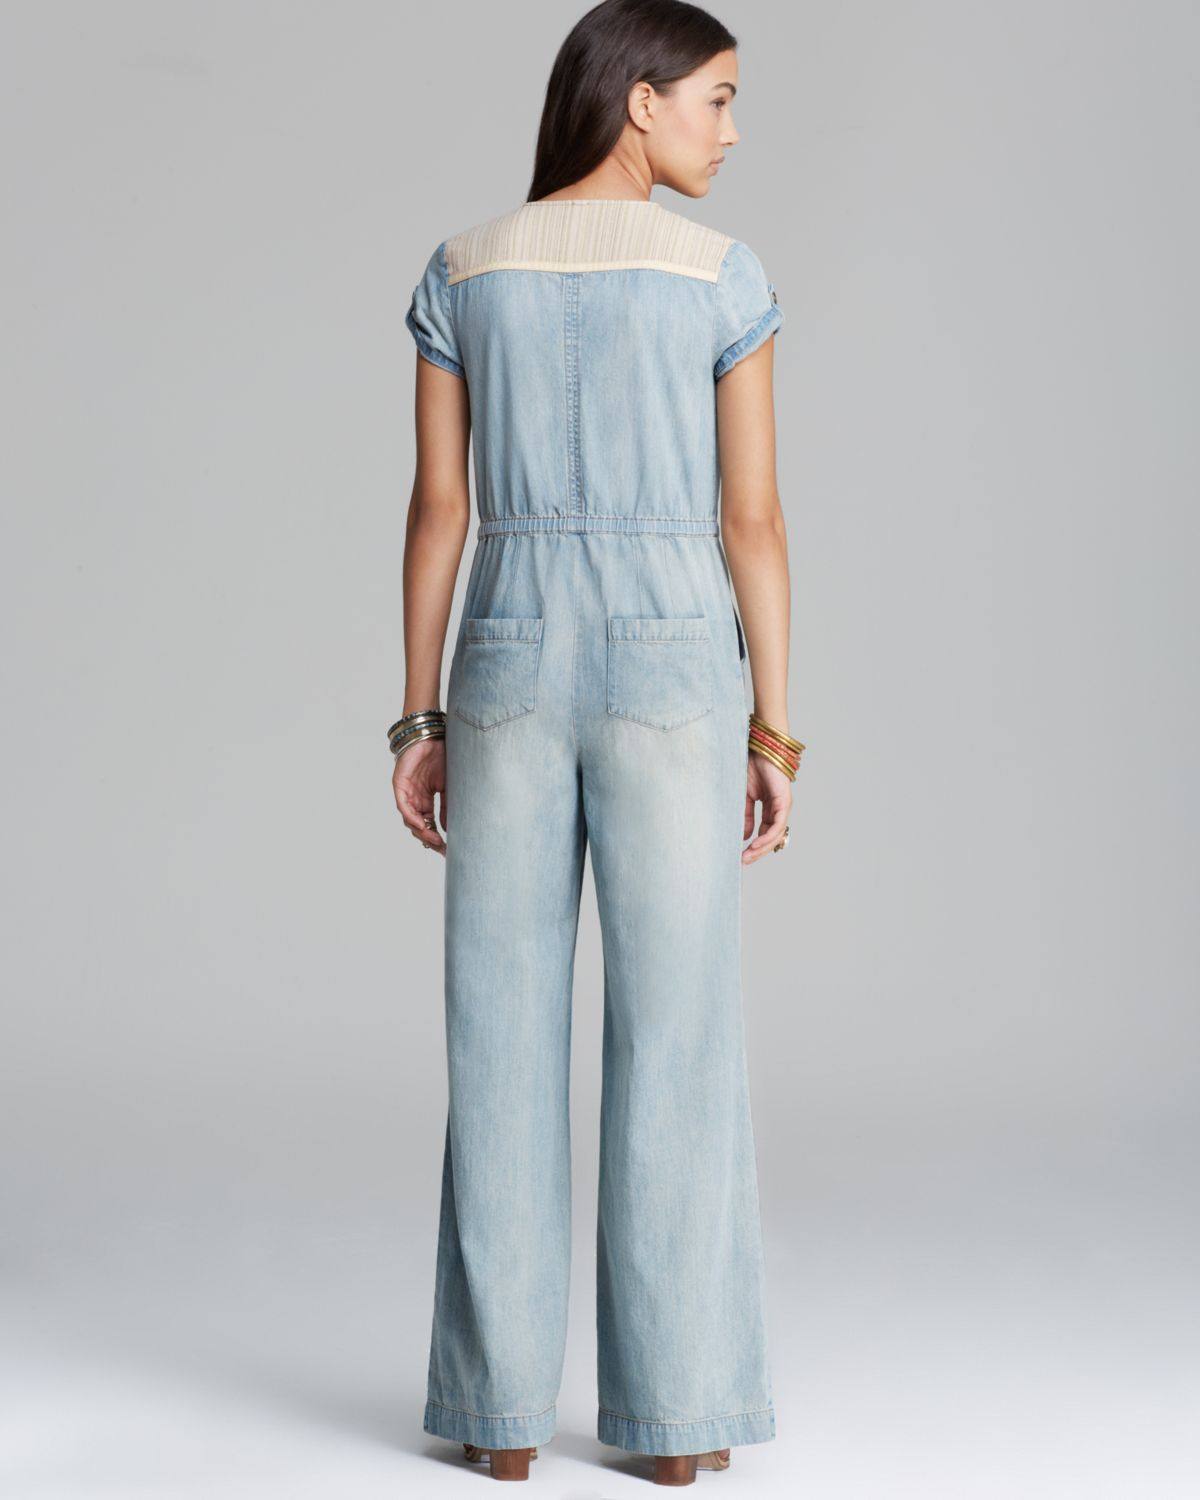 Lyst - Free People Jumpsuit Vintage Chambray Denim in Blue